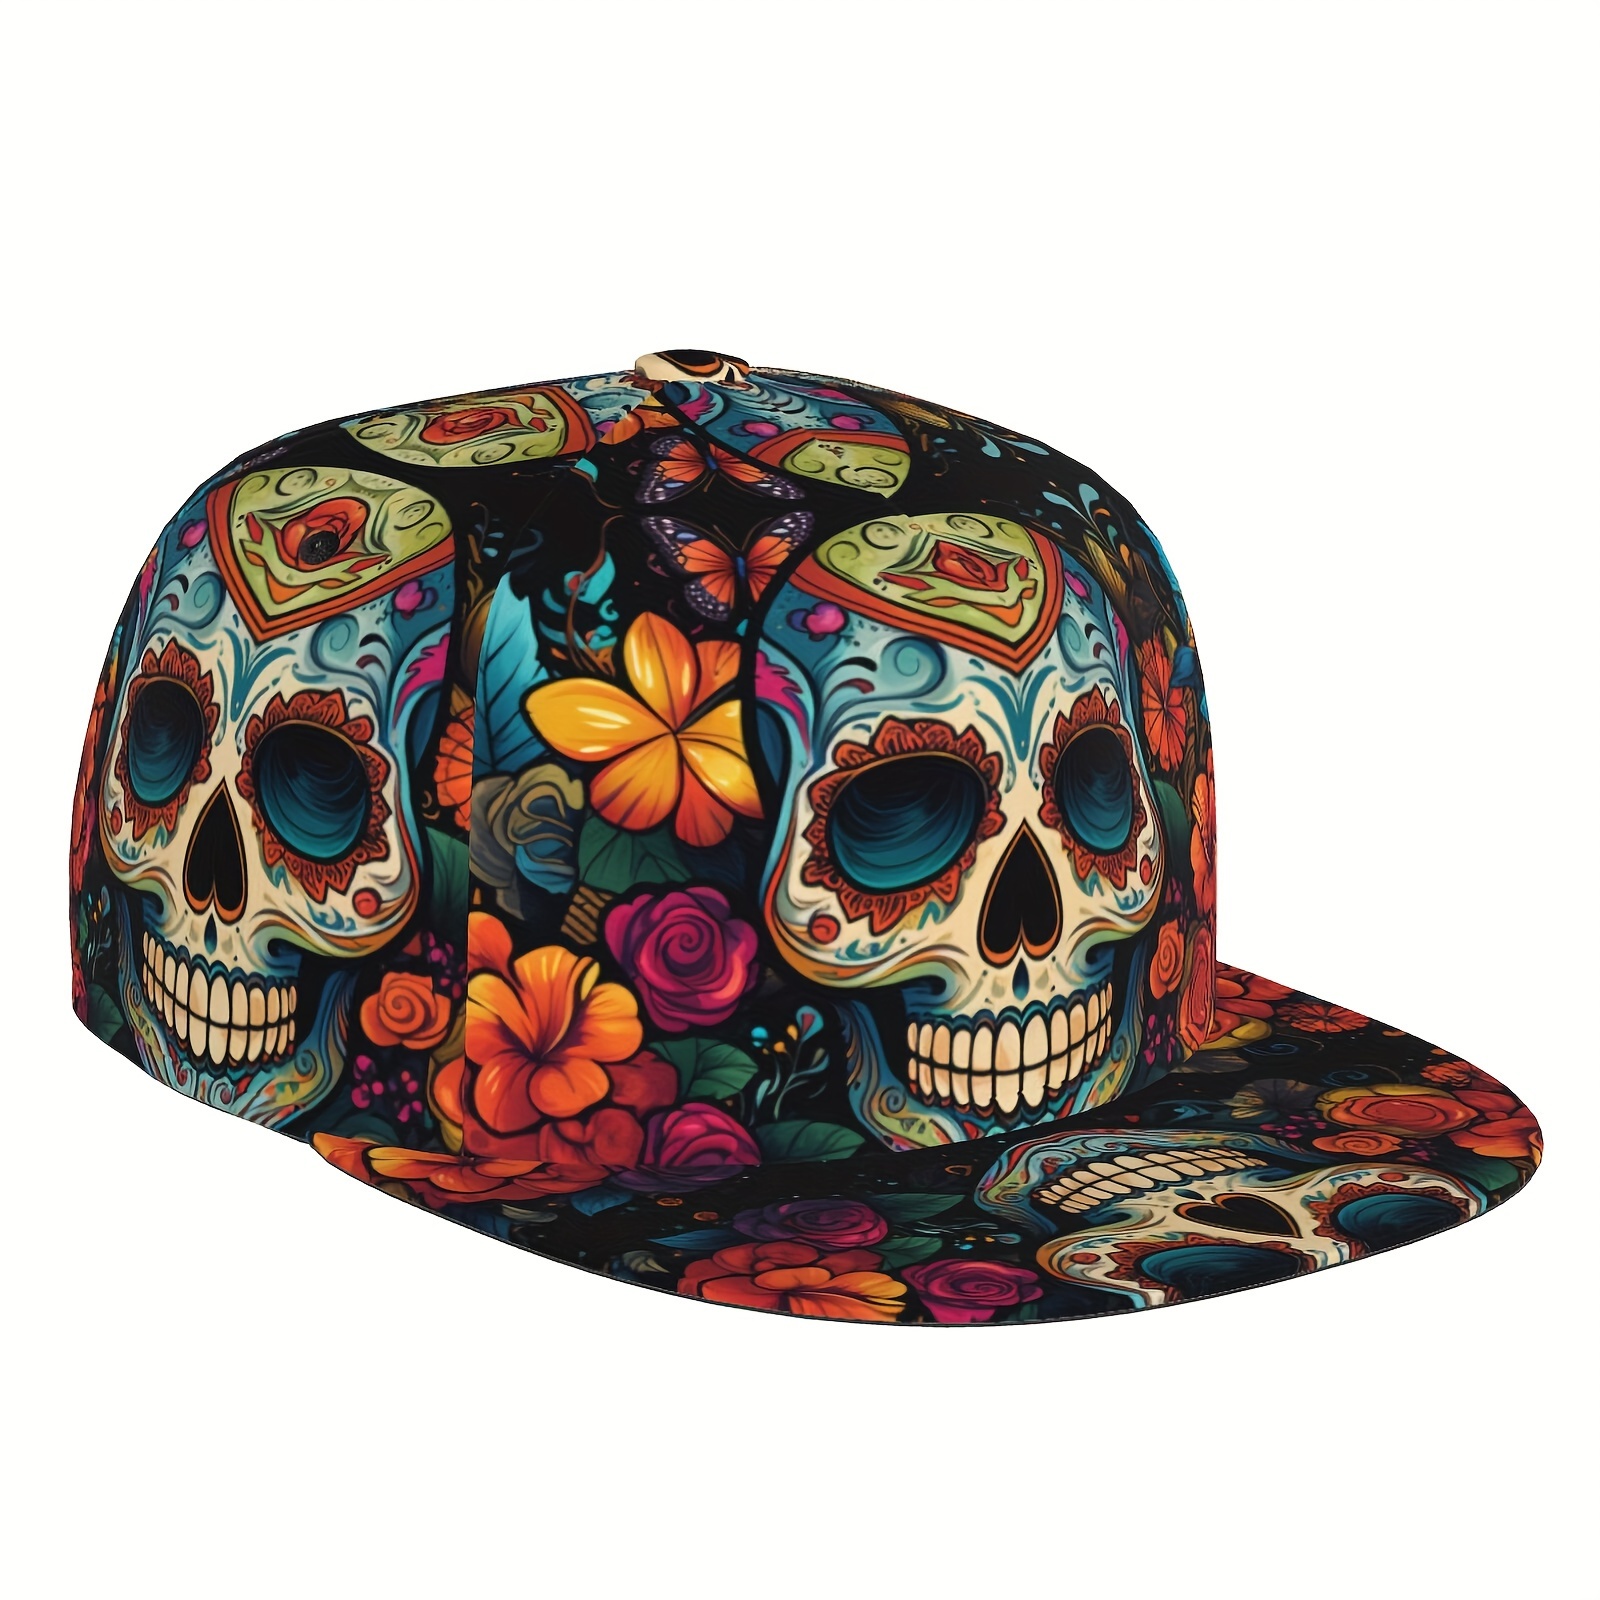 

Sugar Skull And Floral Print Baseball Cap - Lightweight Polyester Snapback Hat For Men And Women, Unisex Adjustable Flat Bill Cap For Running, Outdoor Sports, And Casual Fashion - Hand Washable